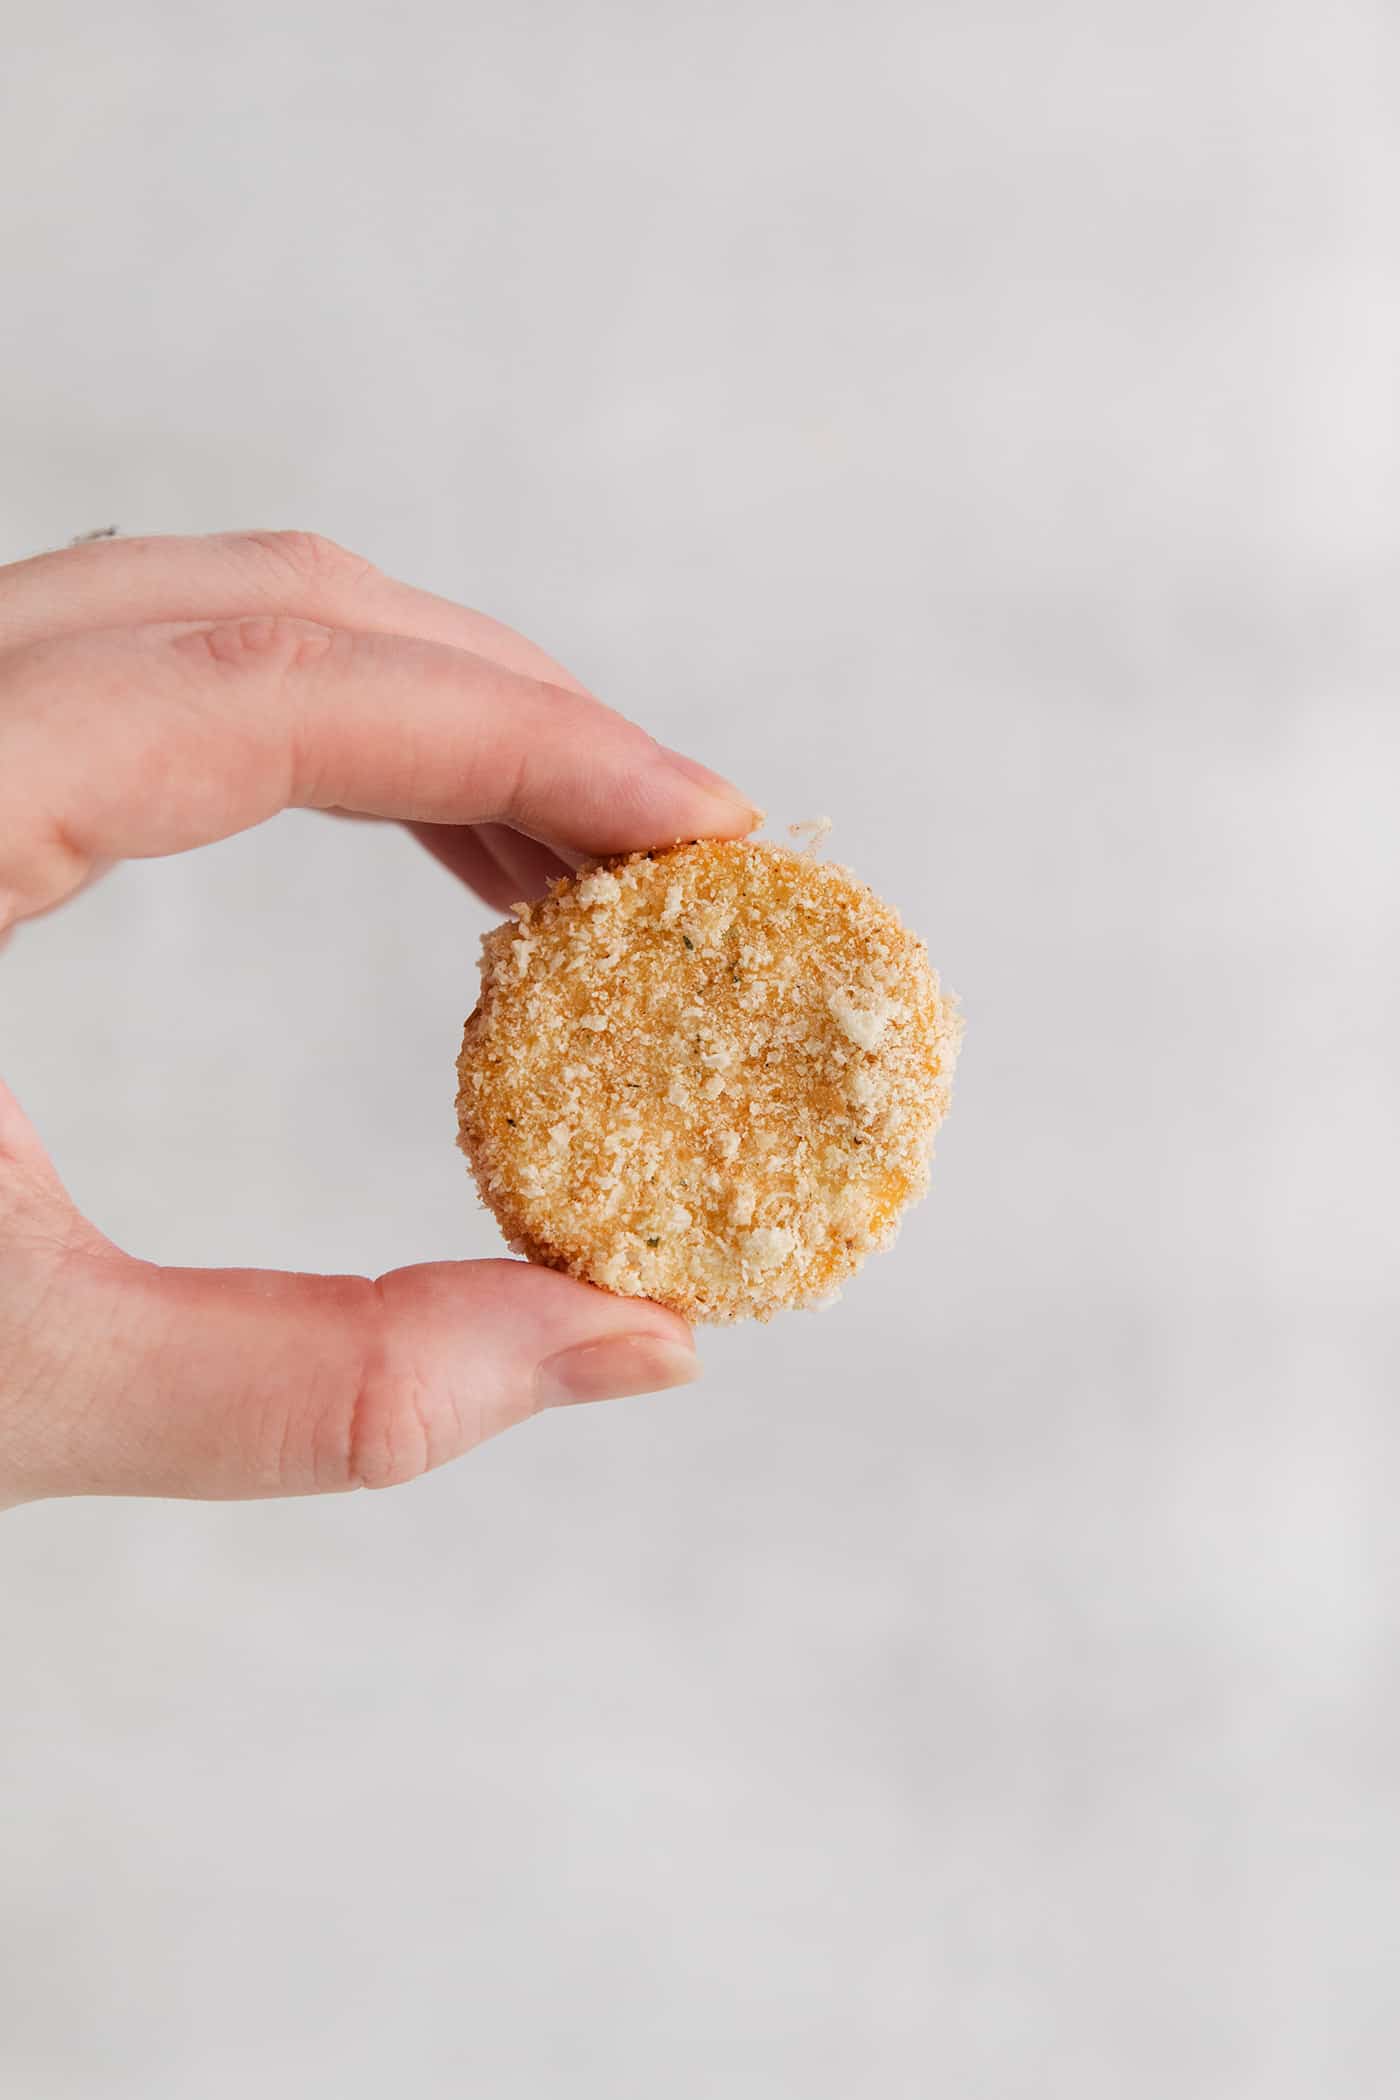 A hand holding a squash rounded coated in bread crumbs